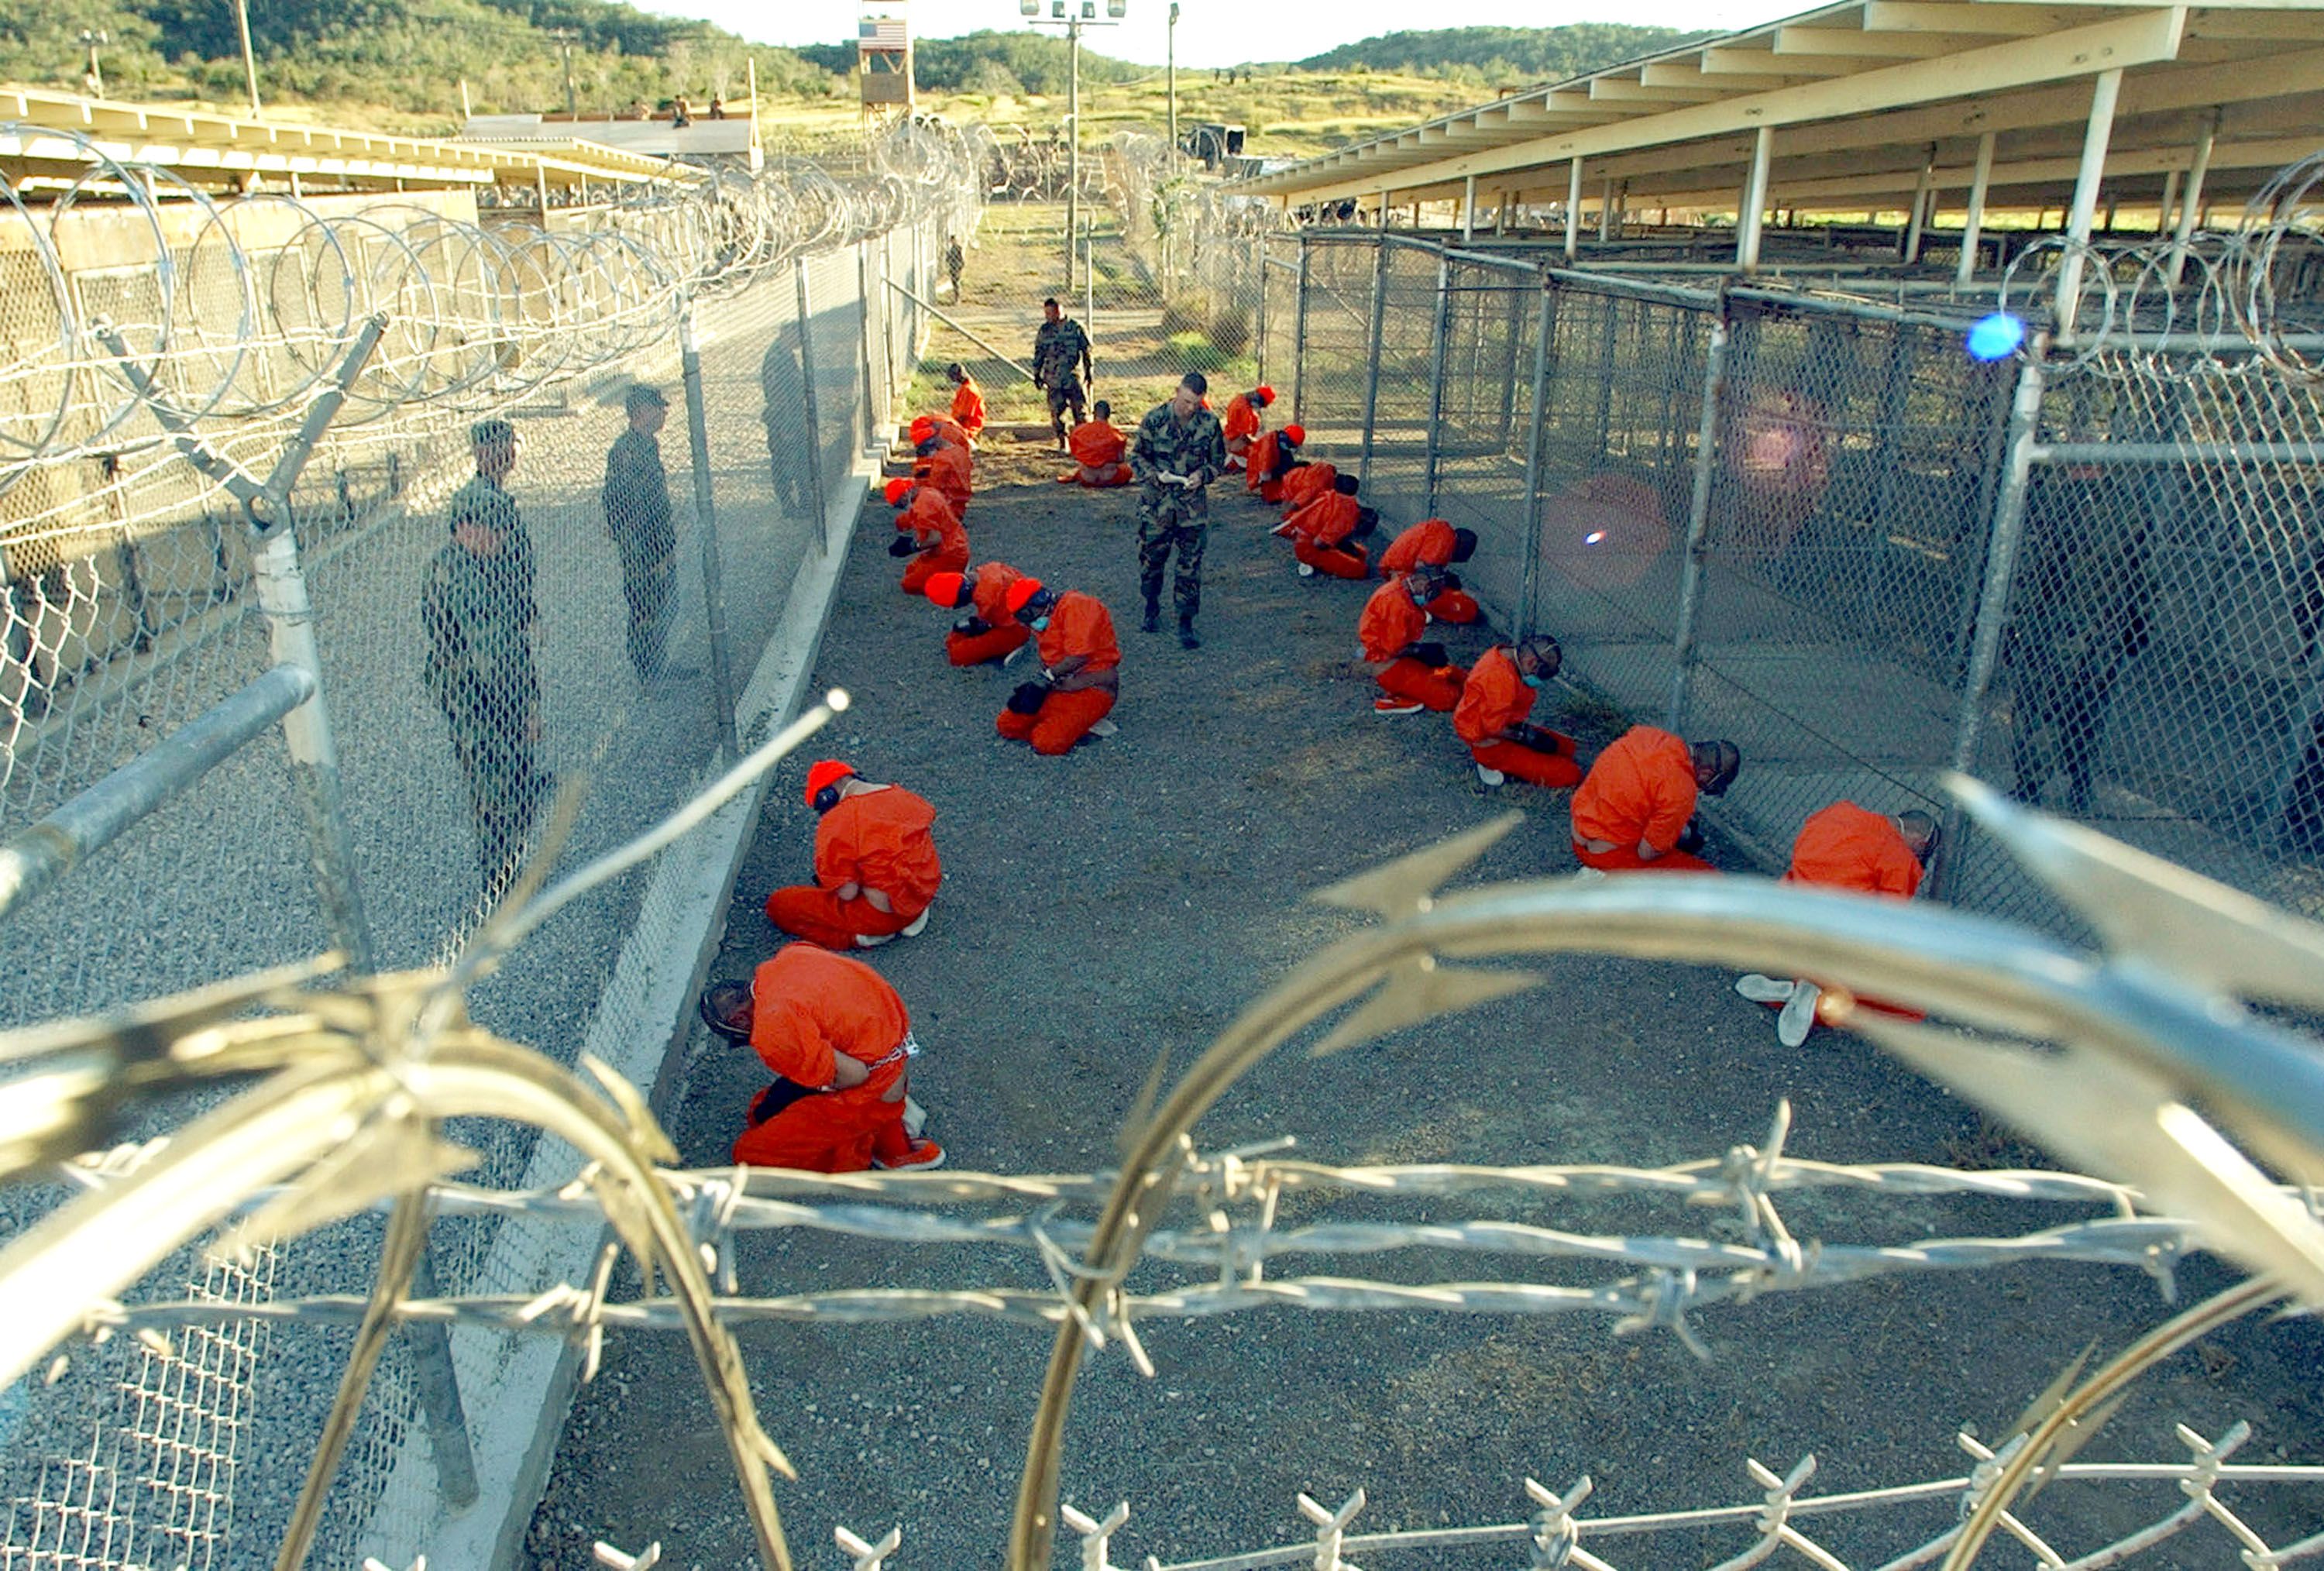 Guantanamo: detainee who reported torture ready to be released